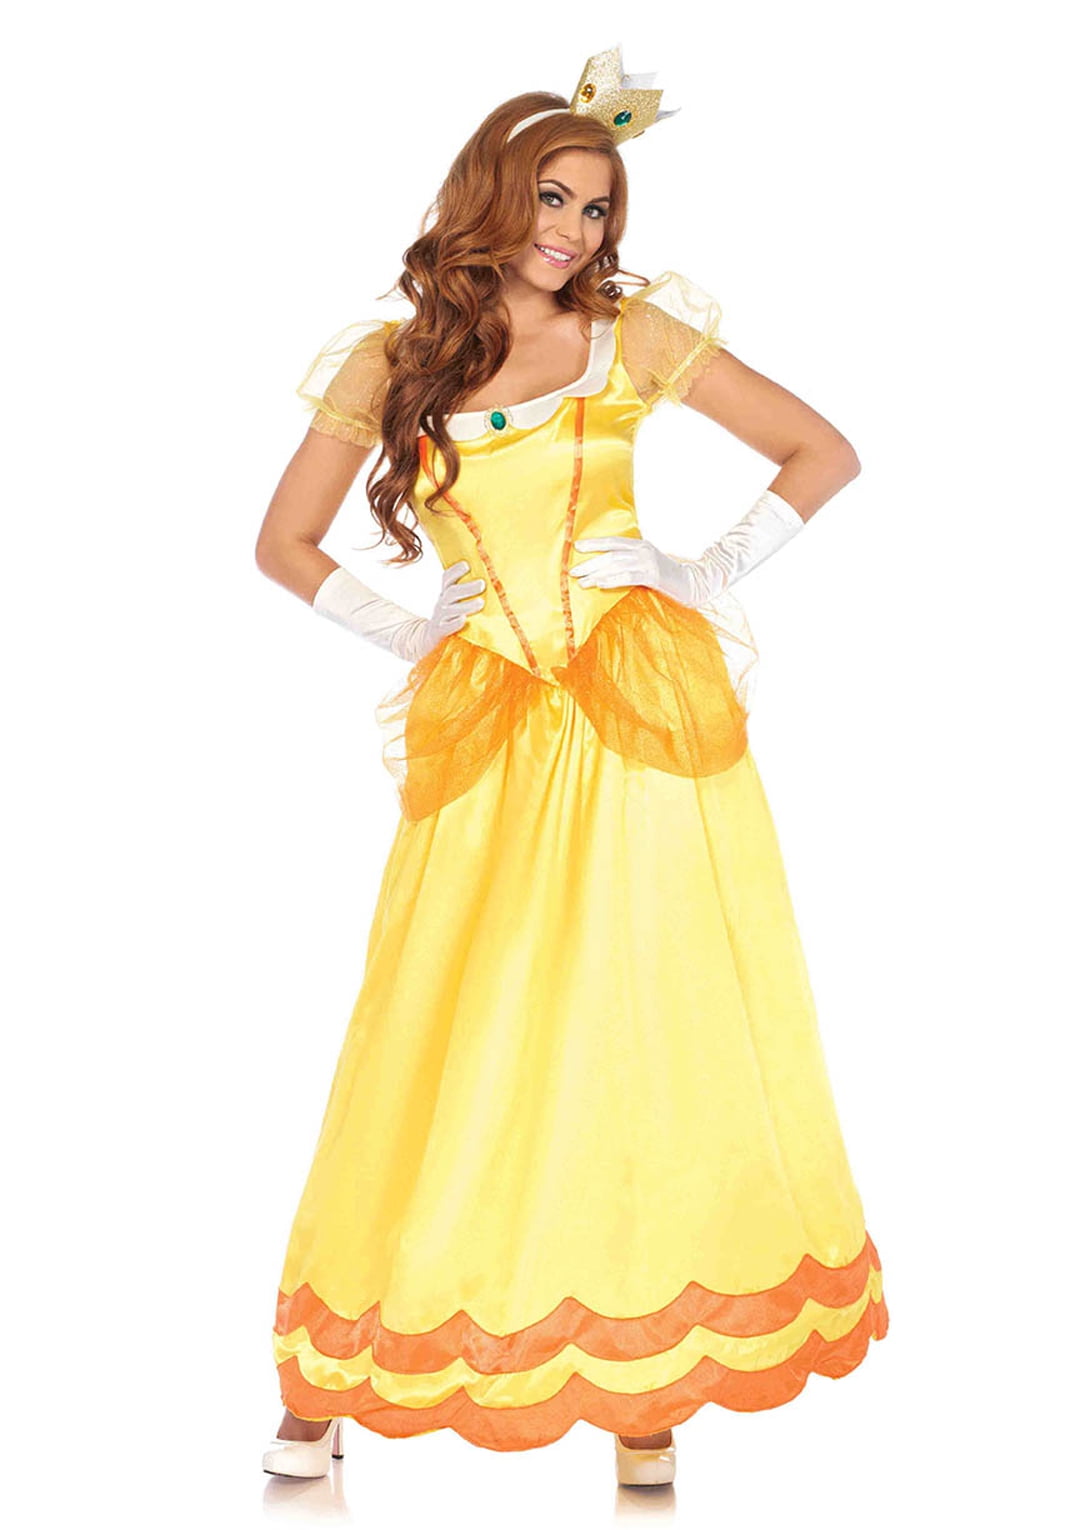 Quality Princess Yellow Glitter Sparkly Ball Gown For dolls Uk Seller Free P&P 